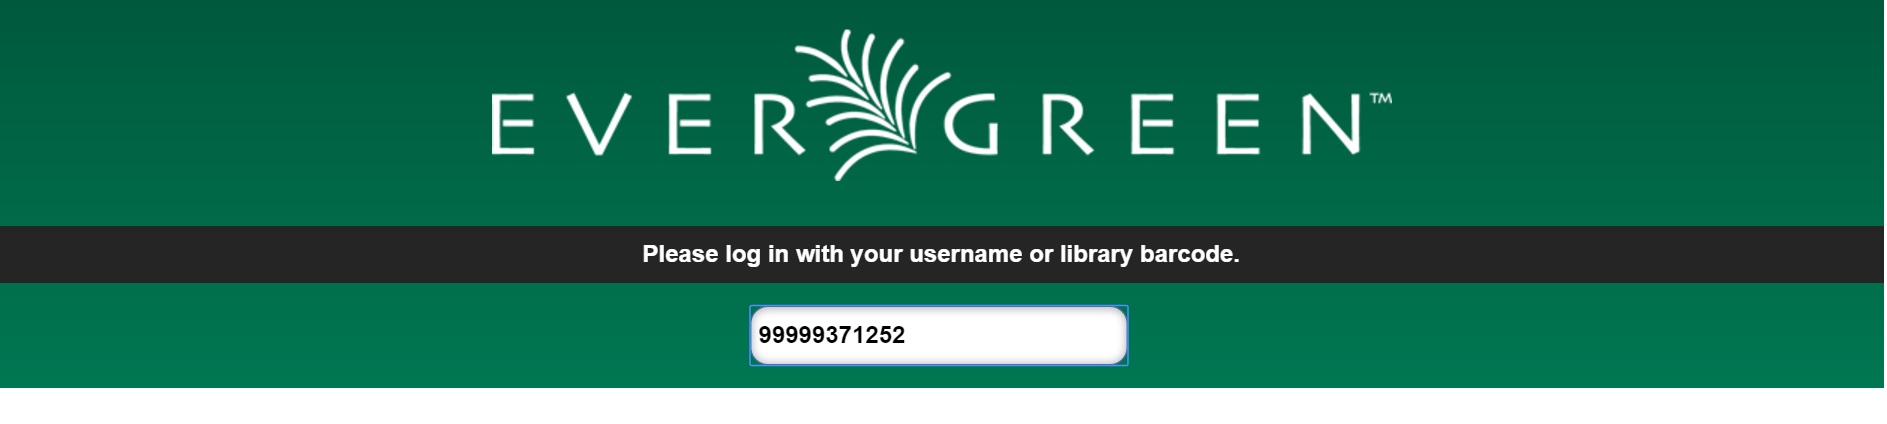 Self check username or library barcode field